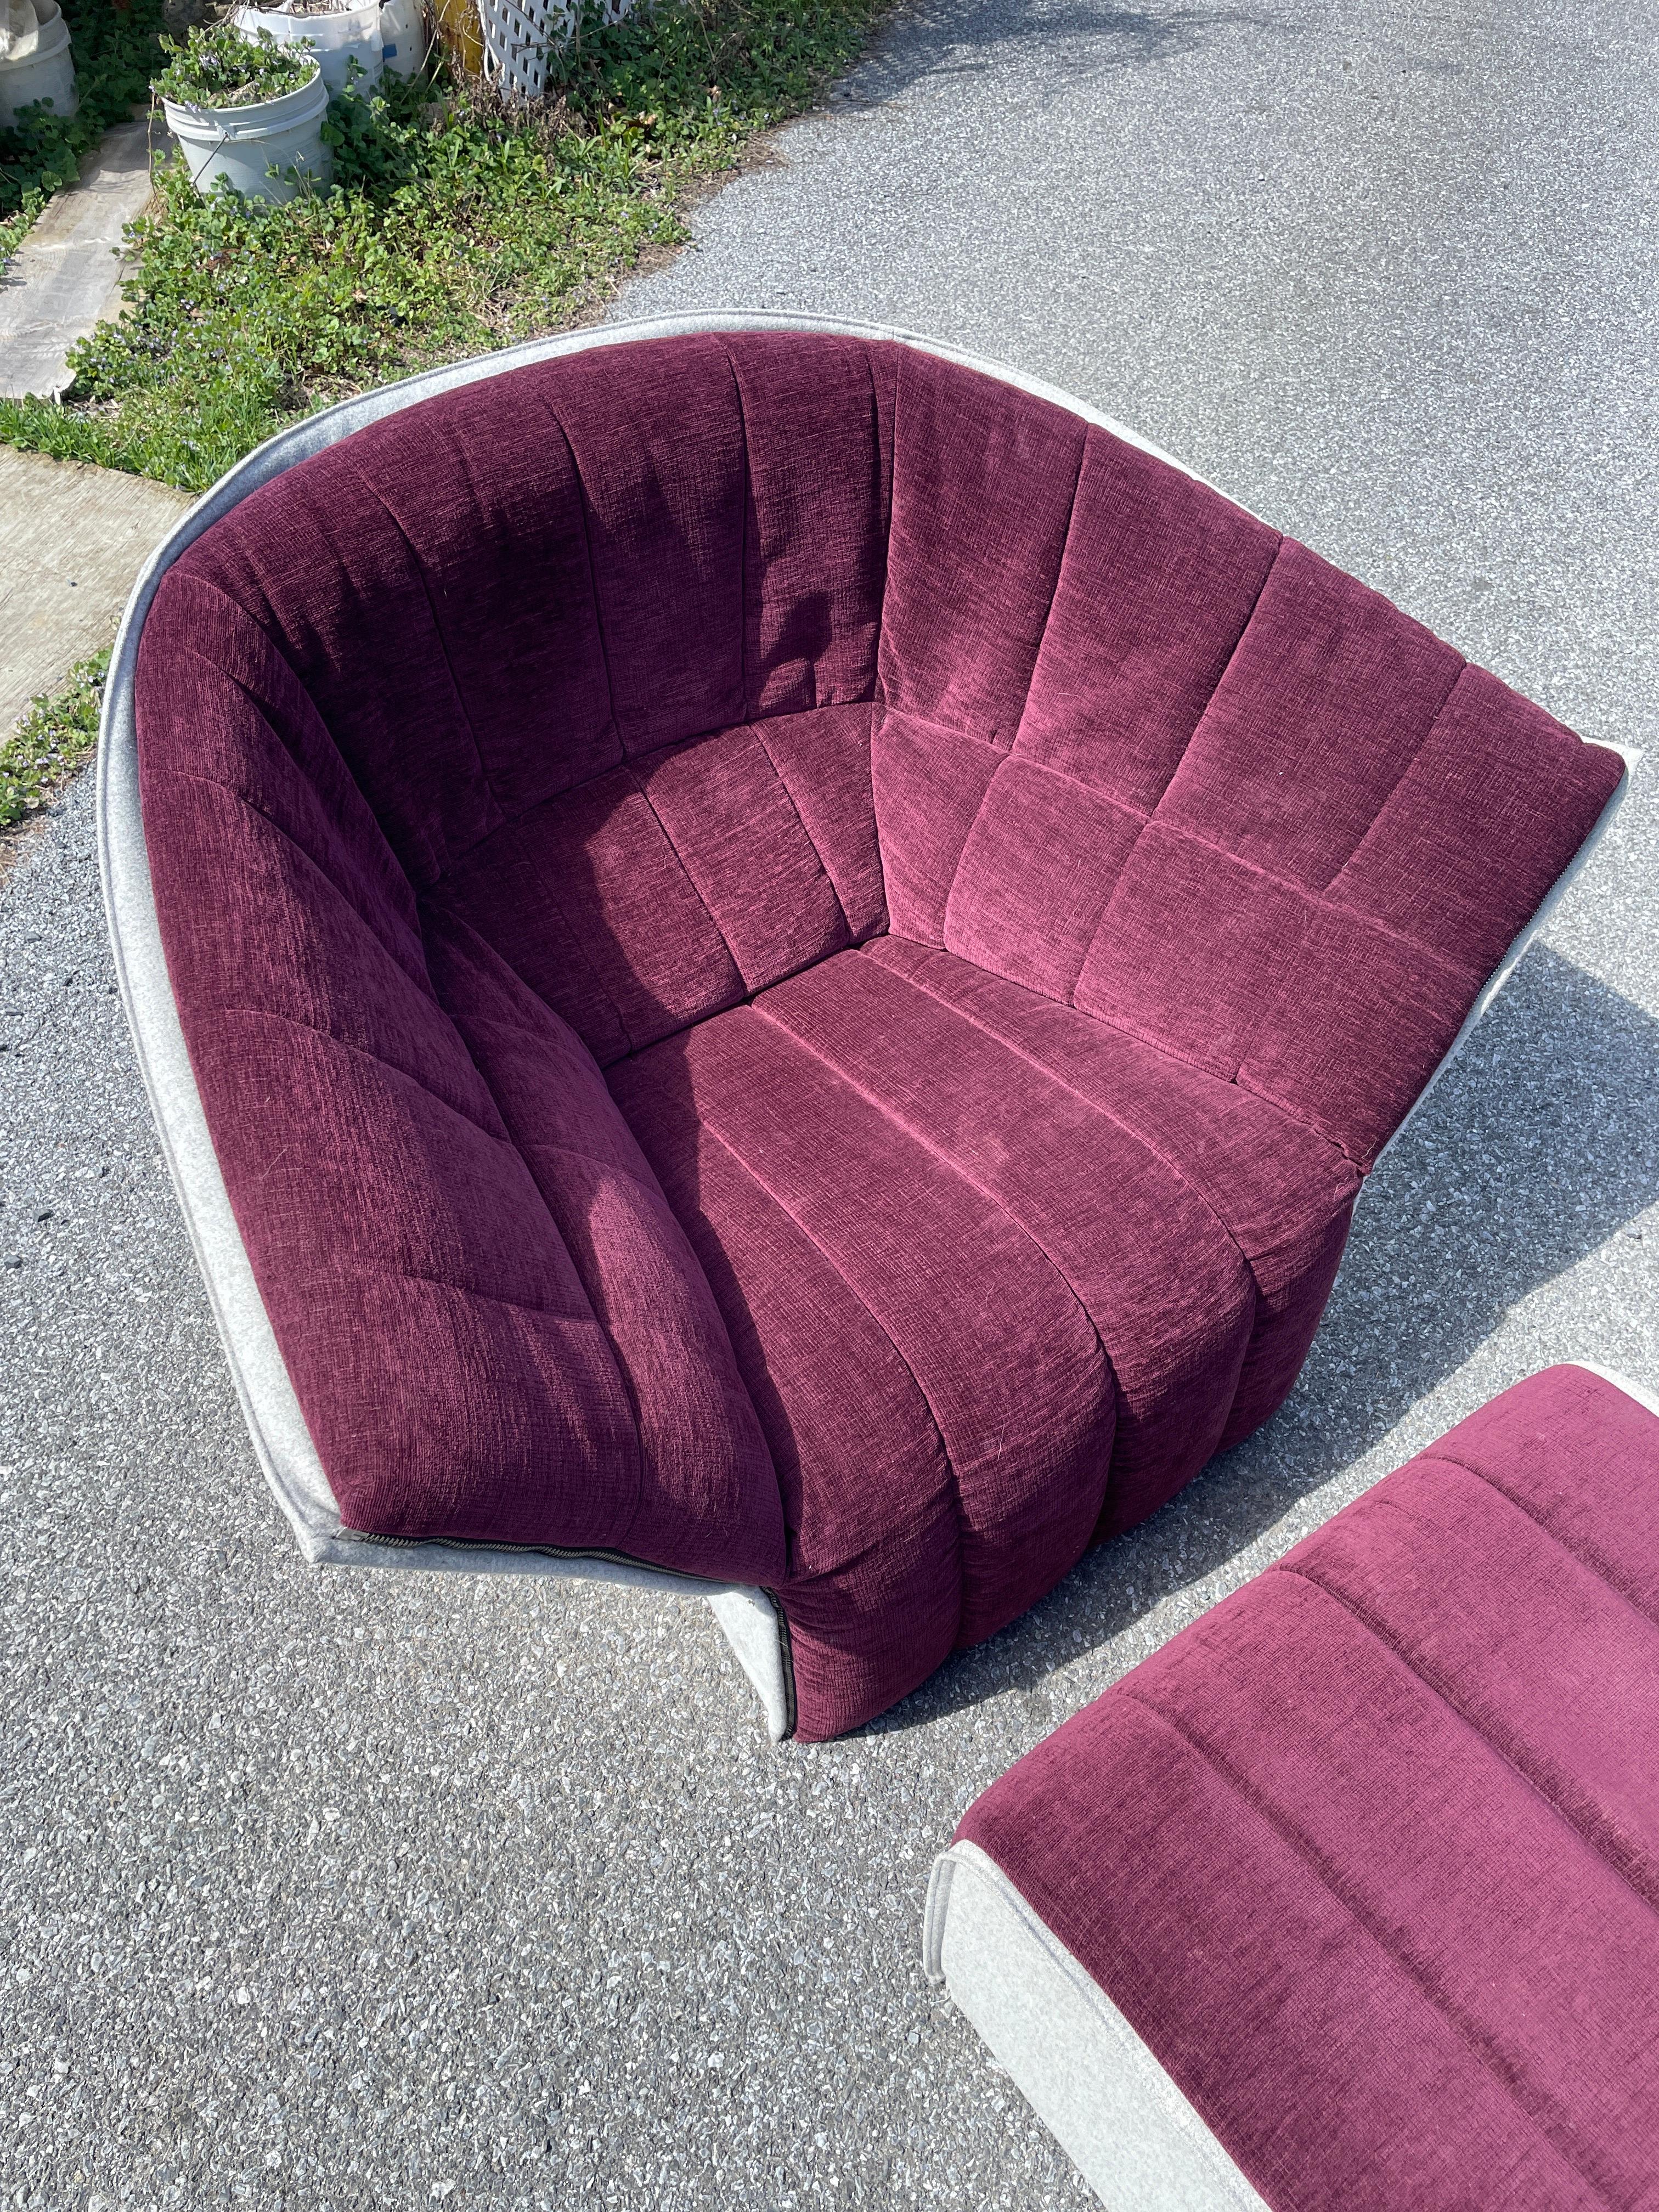 A gorgeous and super comfy chair and ottoman by Inga Sempé for Ligne Roset. The set has lush burgundy upholstery and a grey felt shell making it soft to the touch over every square inch. The upholstery zips off for easy cleaning and Ligne Roset